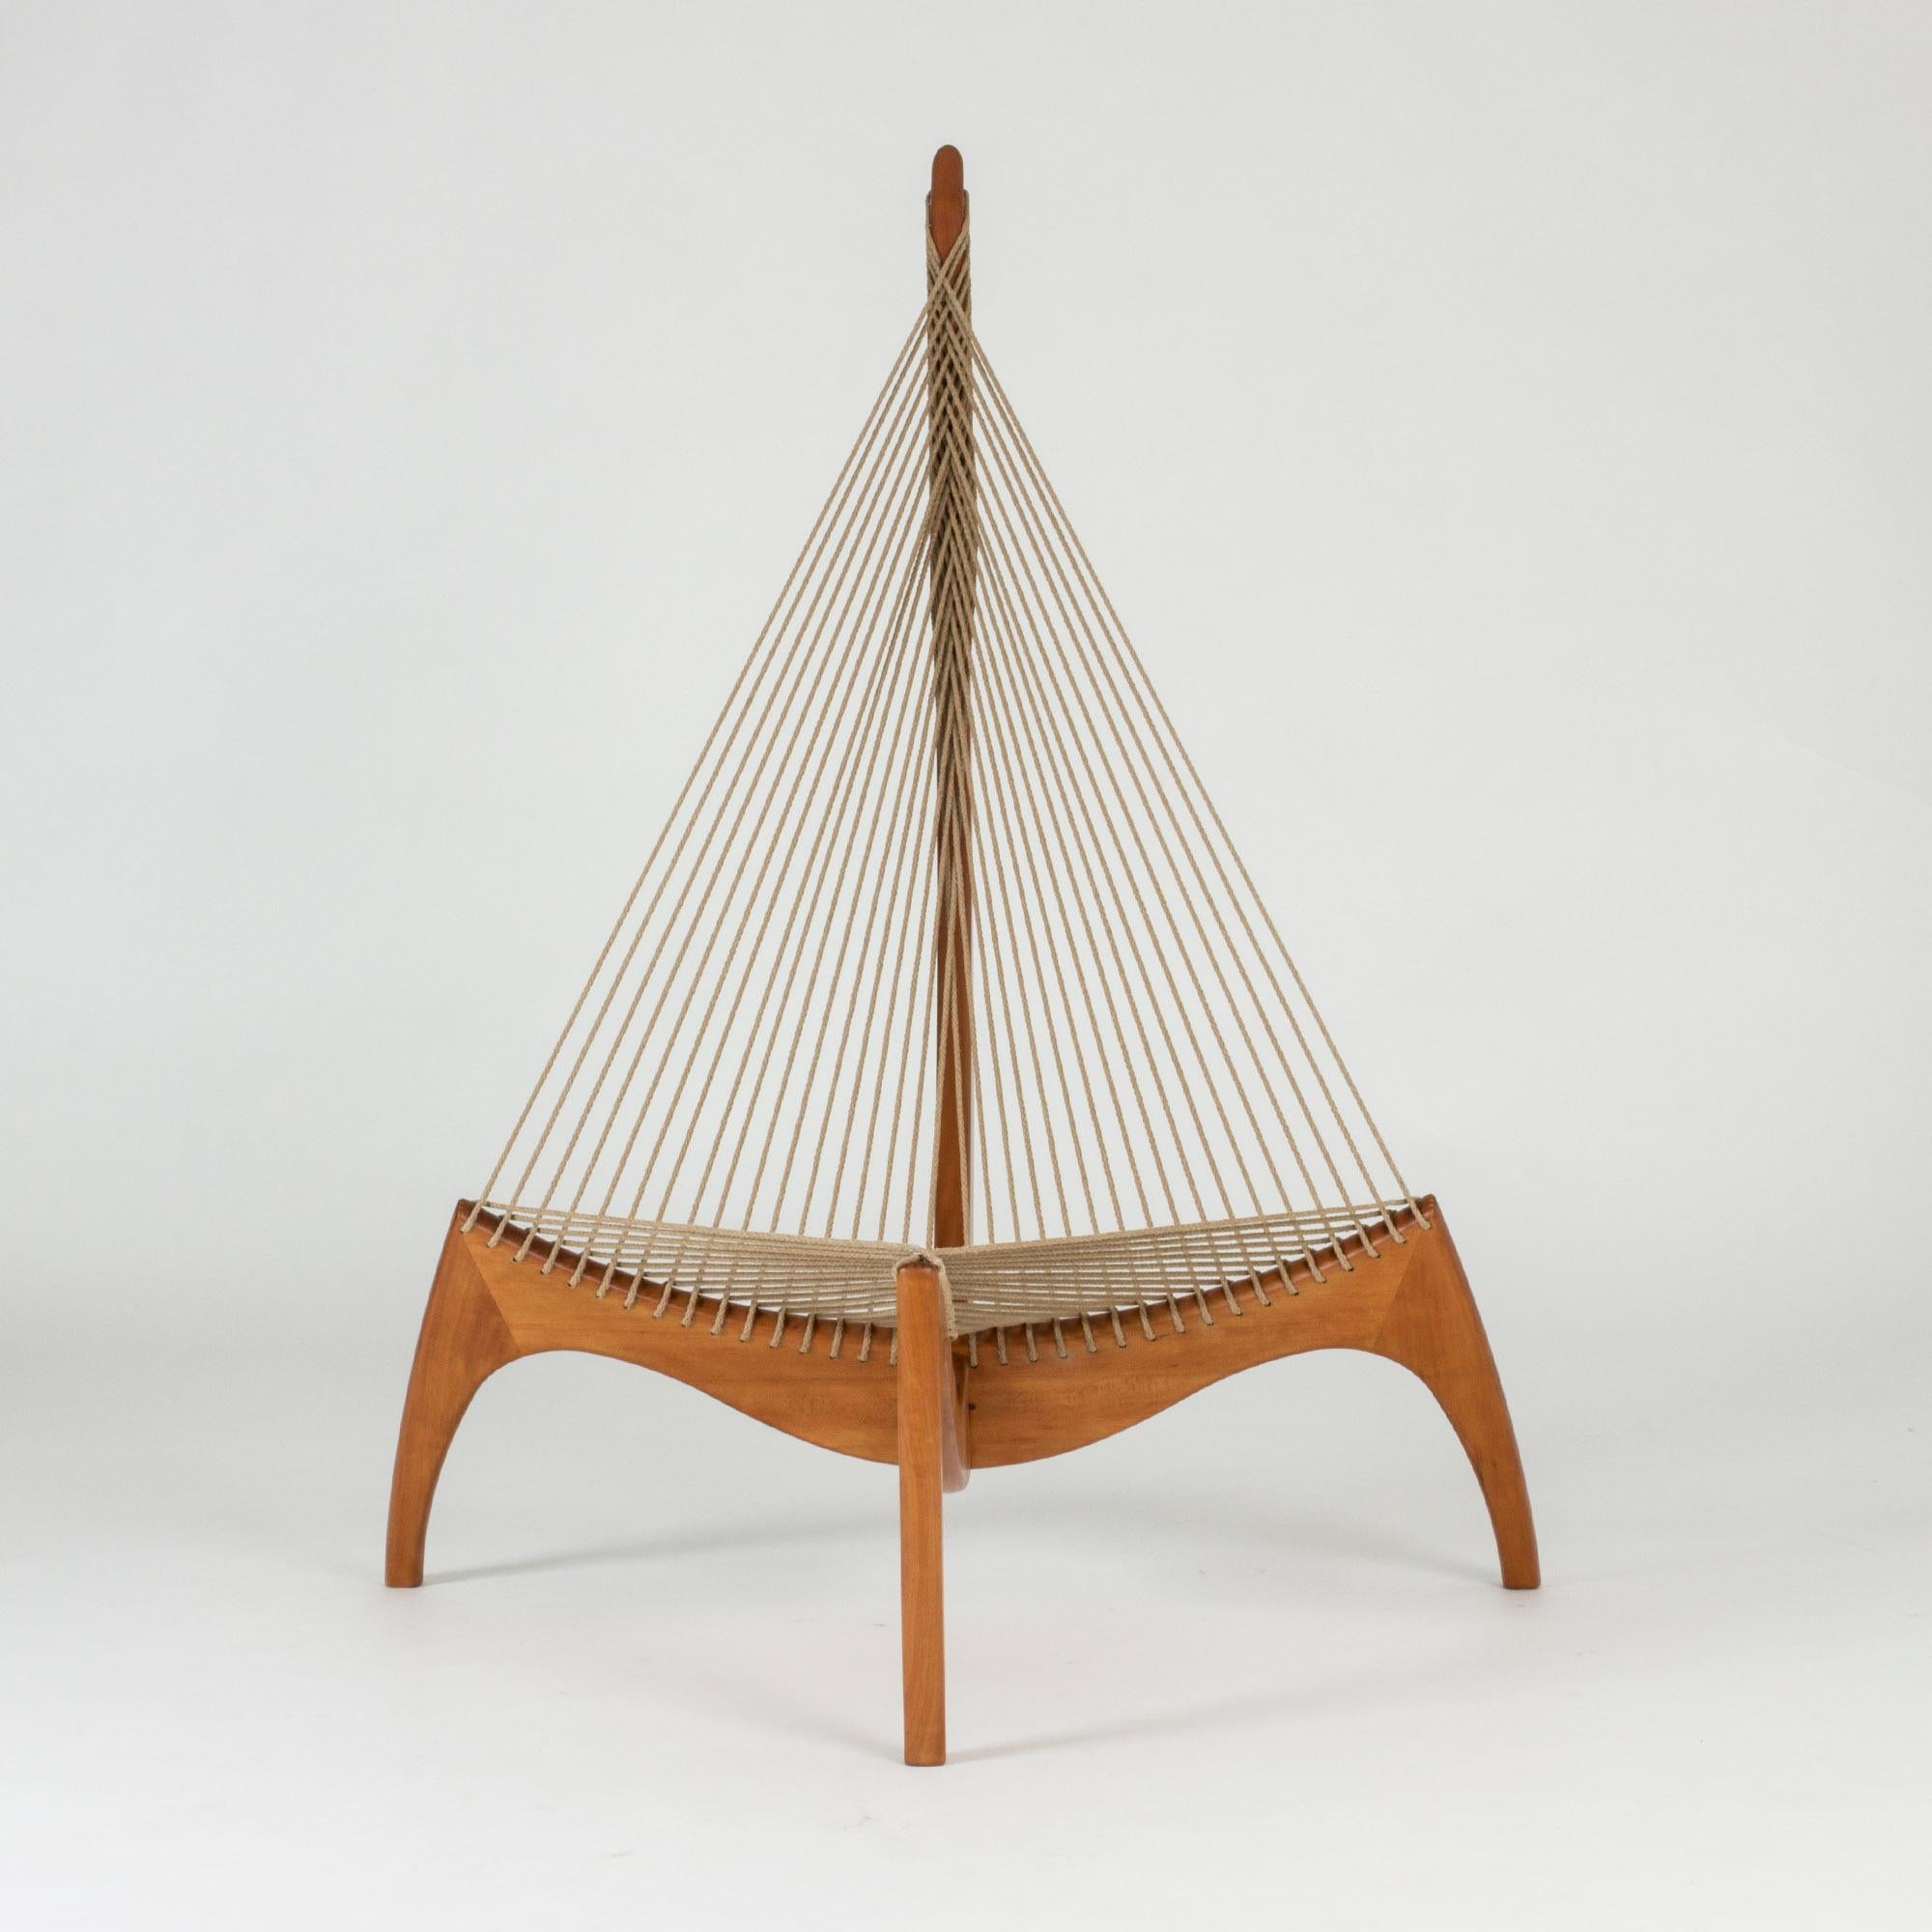 “Harp Chair” by Jørgen Høvelskov, made from cherry wood and flag line. This stunning chair was launched in the early 1960s and was highly acclaimed for its unique design. Cherry wood in beautiful condition.